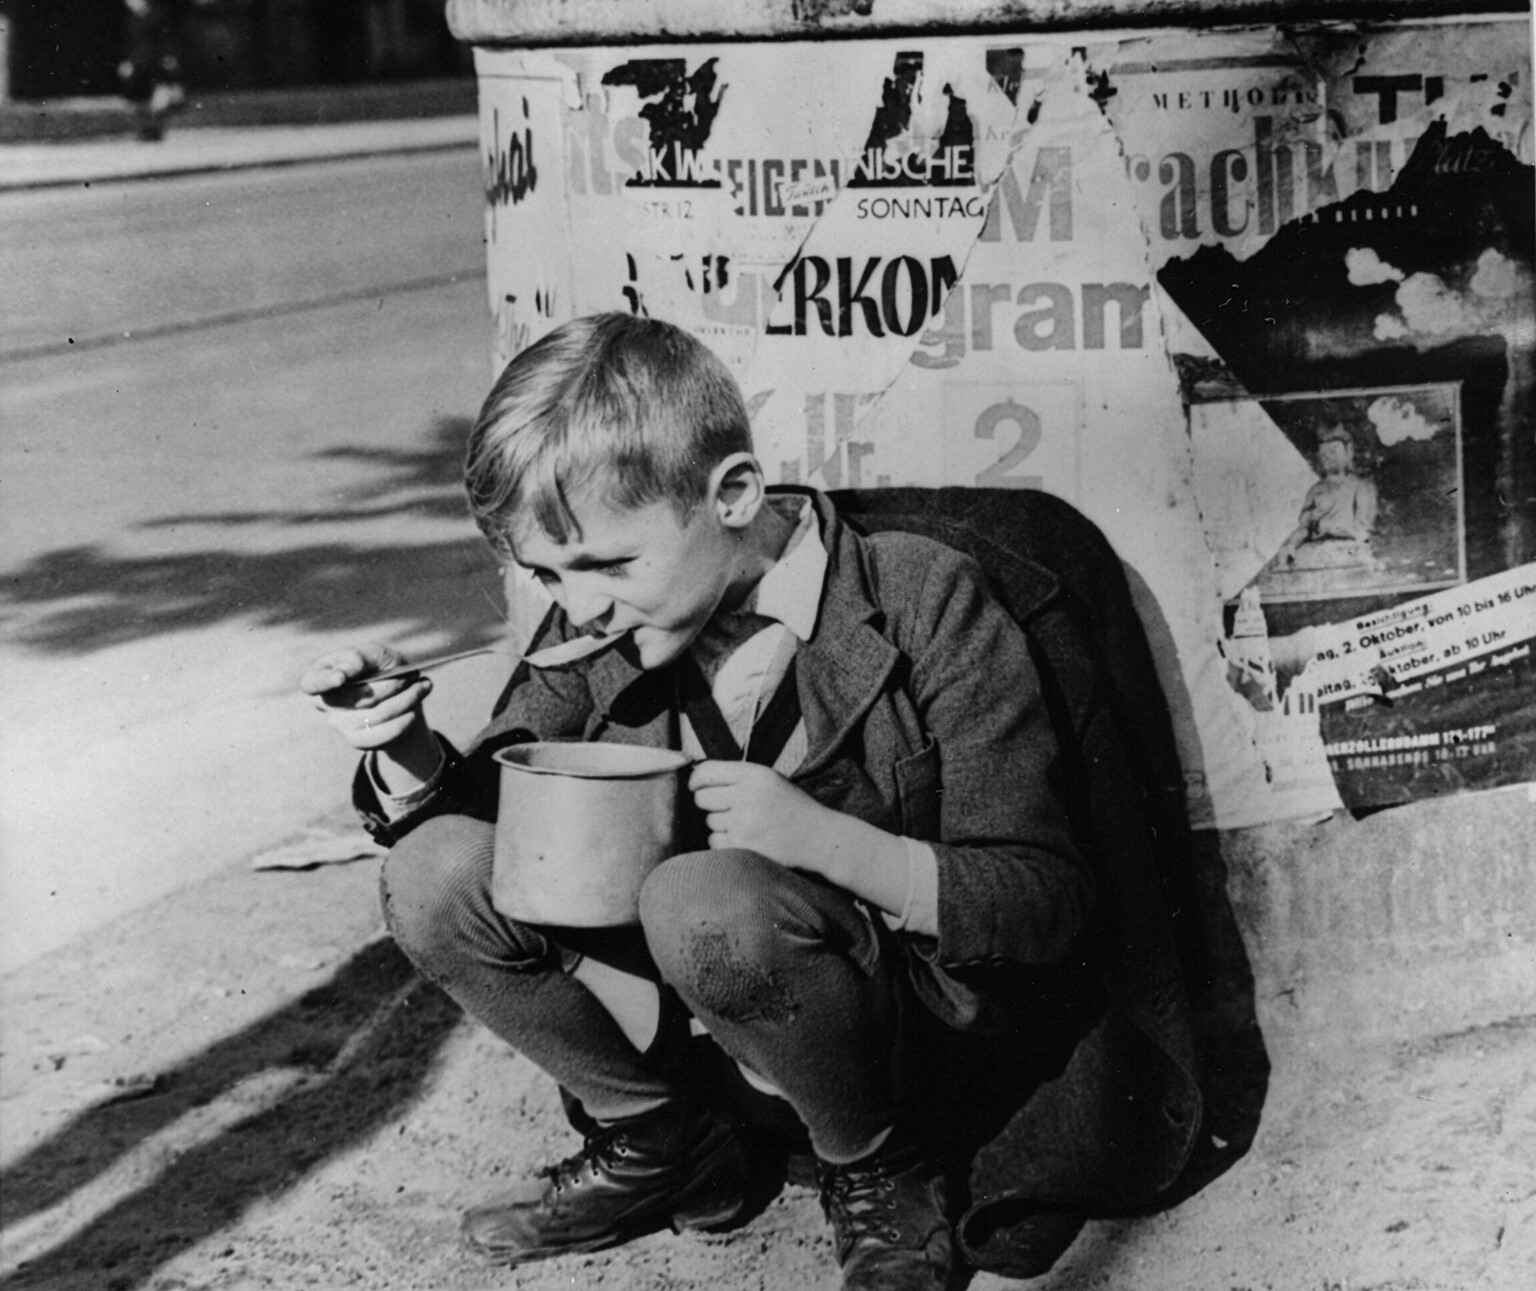 A German child in Berlin eats soup delivered by Western planes during the Berlin Airlift.